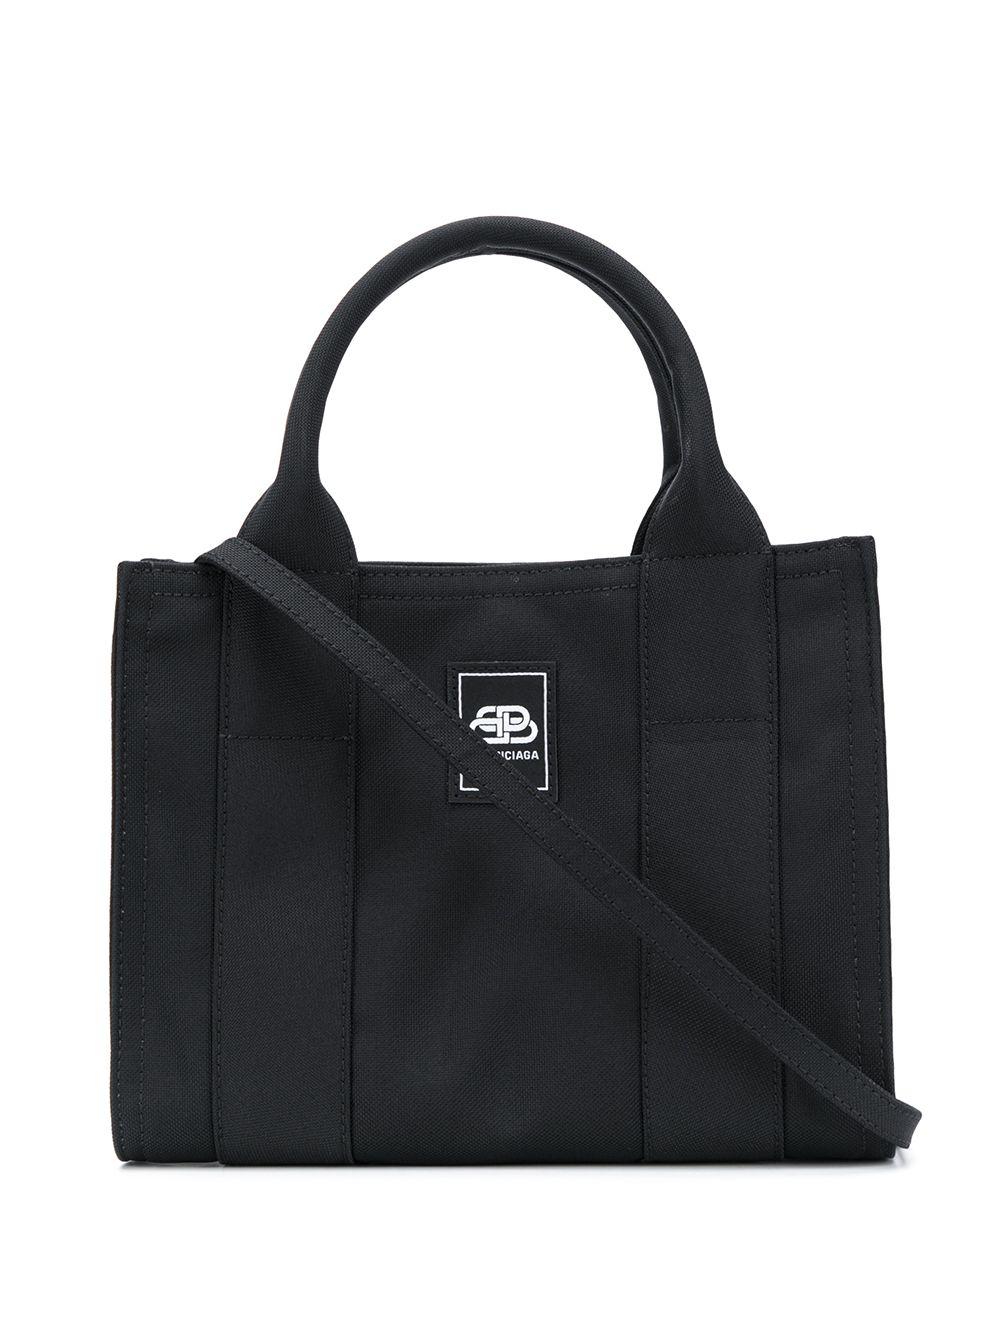 Balenciaga Synthetic Trade East-west Nylon Tote in Black | Lyst